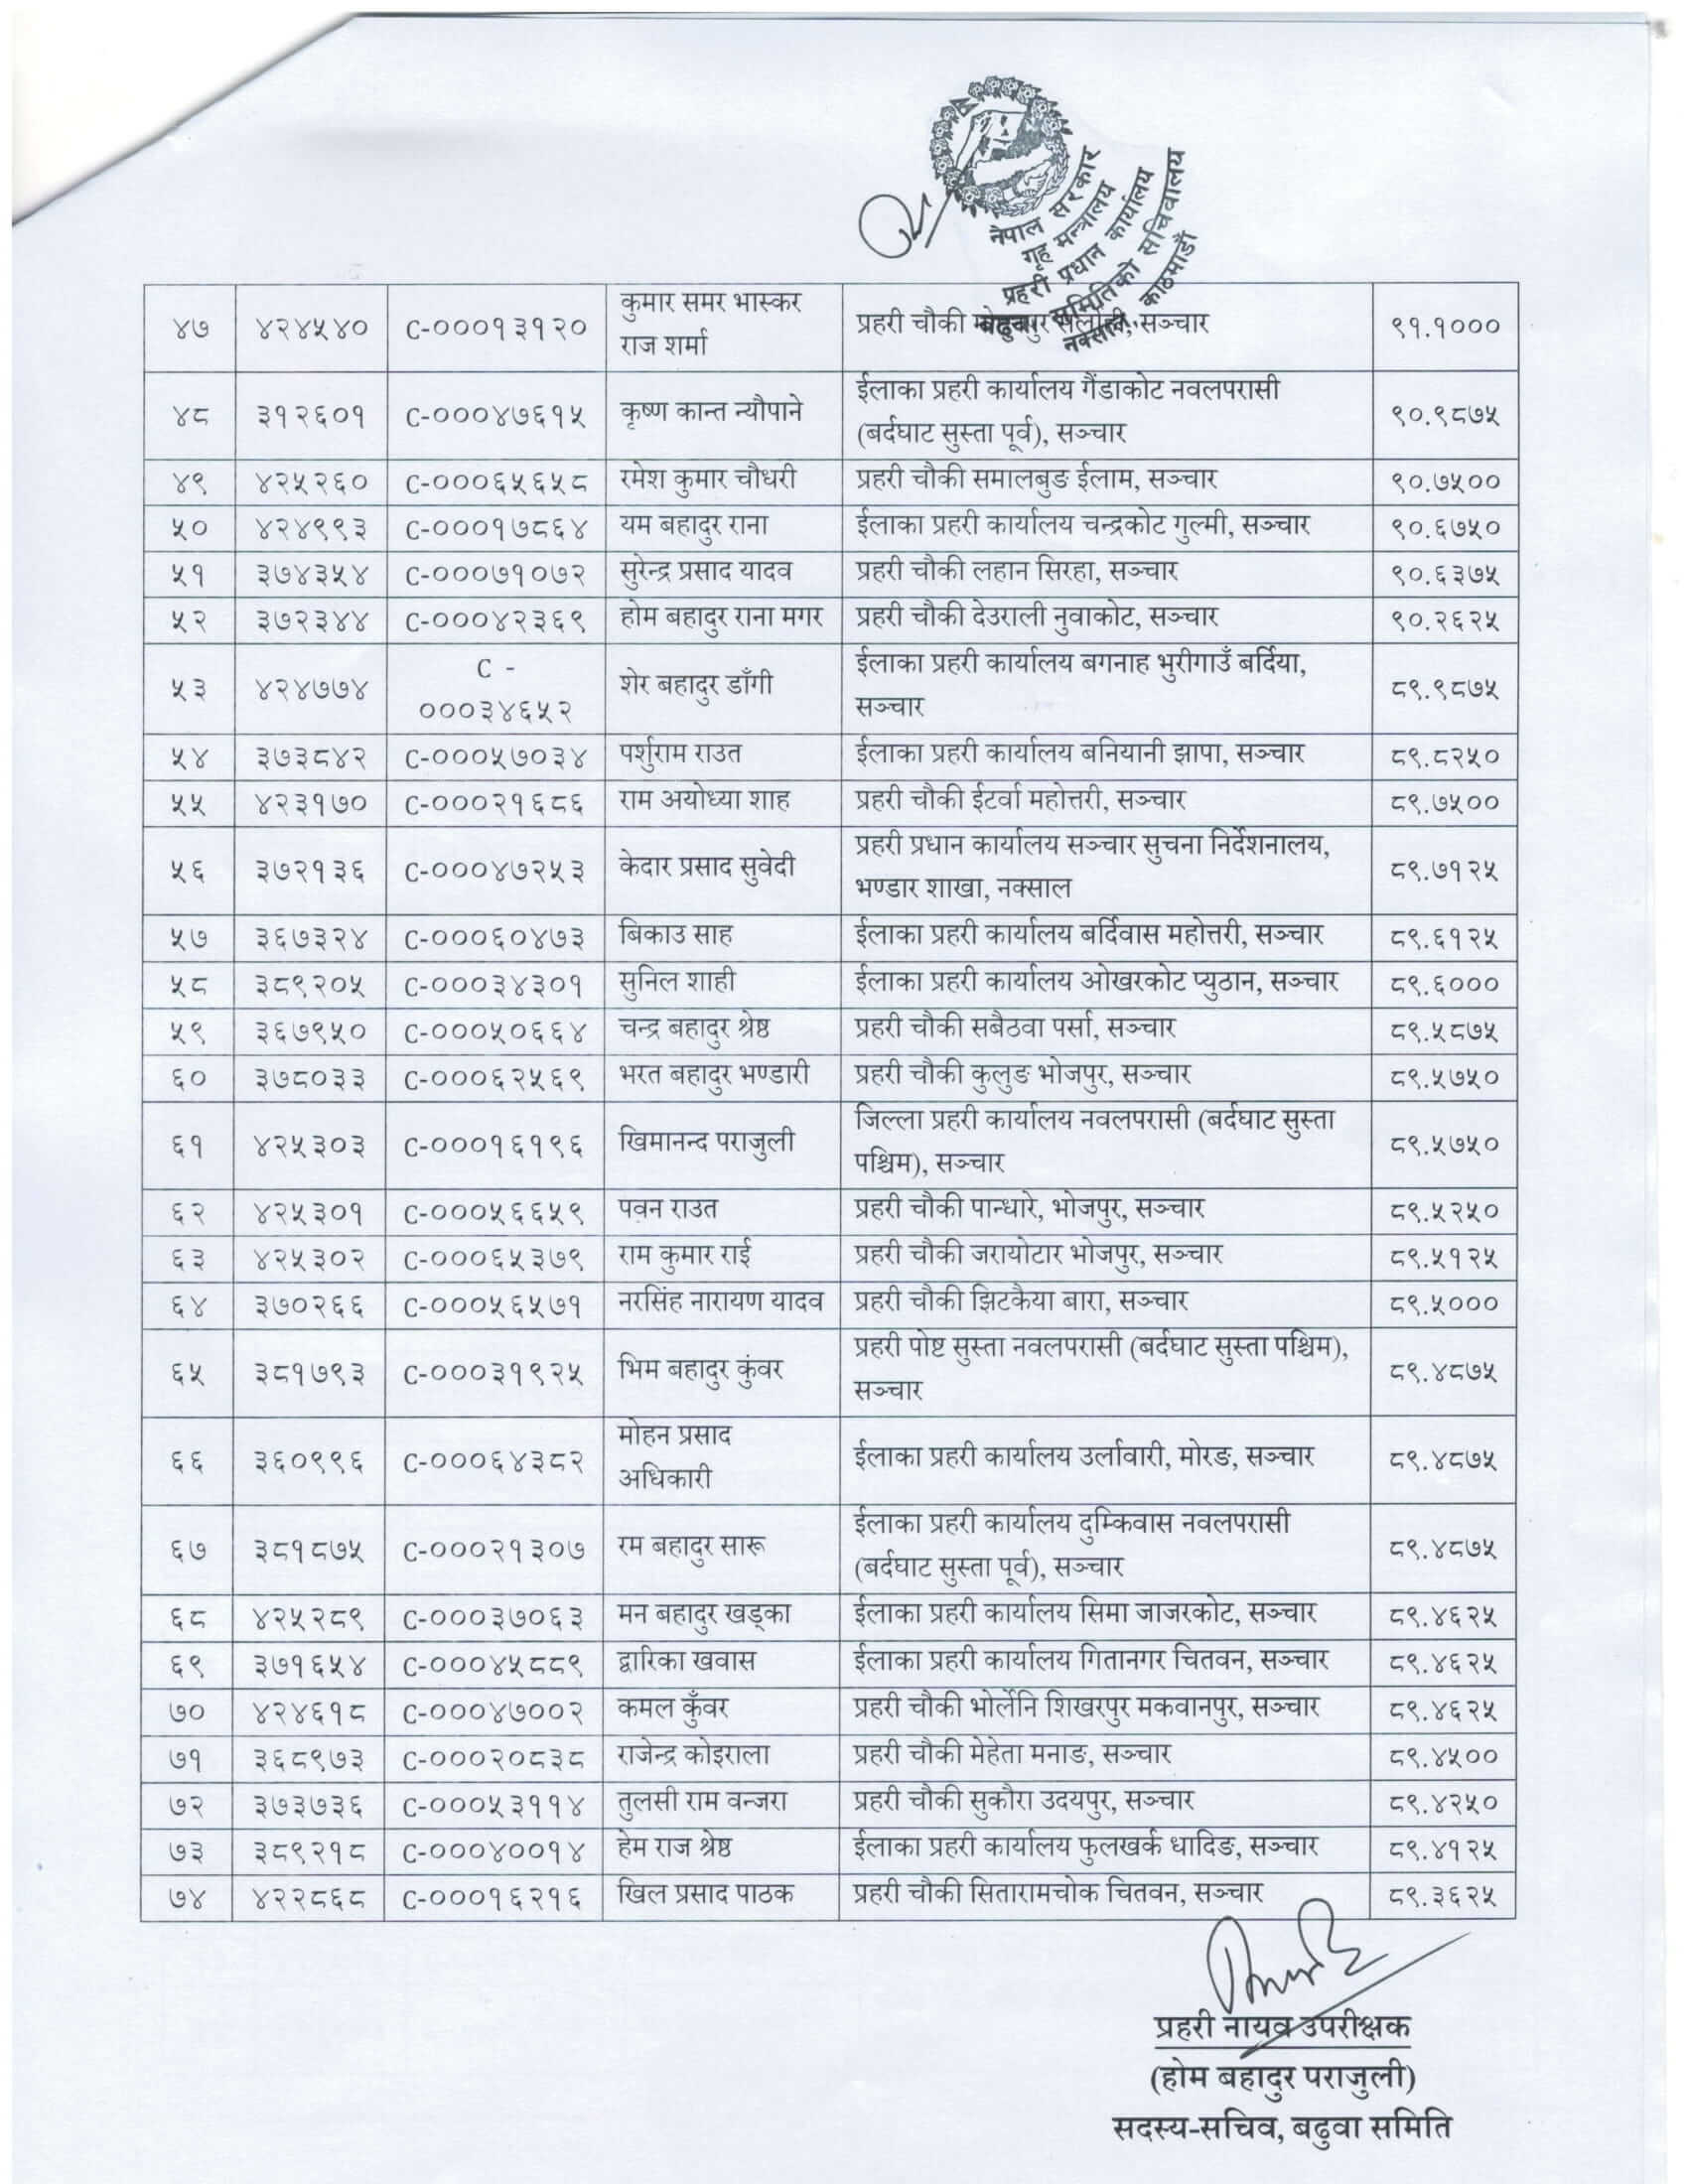 Nepal Police Technical ASI (Sanchar) Promotion Recommend List